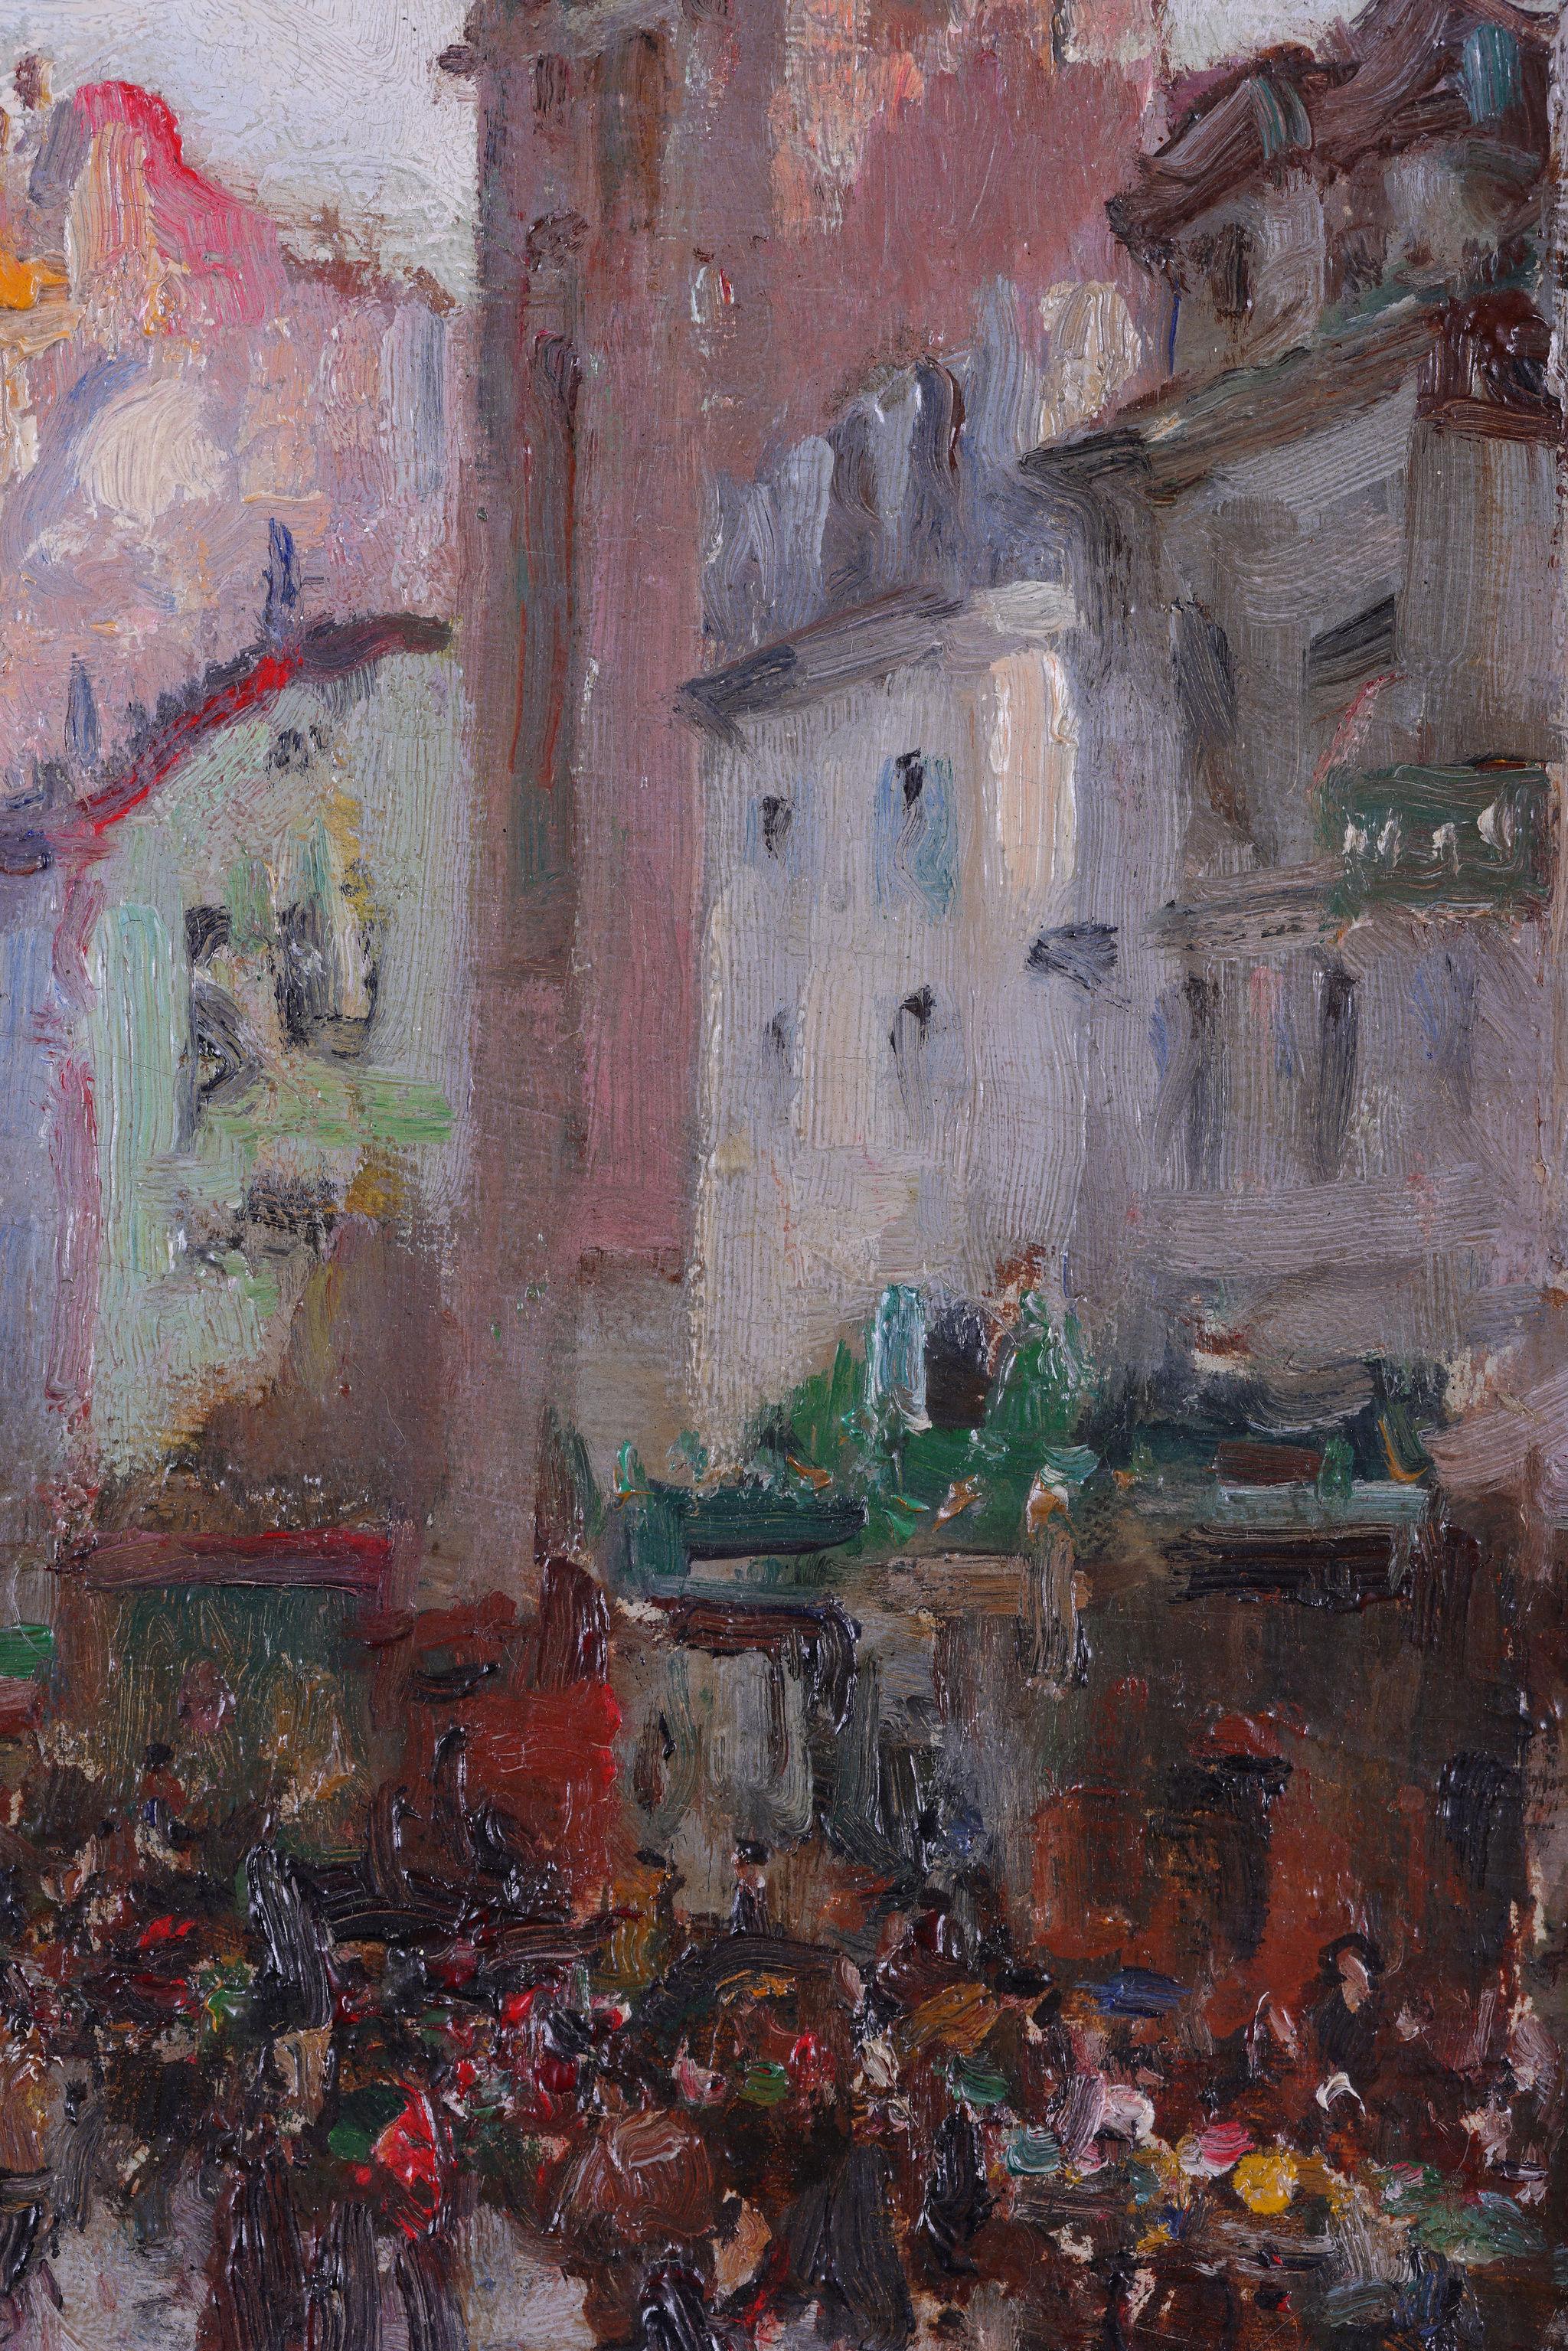 This is a wonderful example of Merio Ameglio's art painted in the Place Des Abbesses very close to where he lived in Montmatre, Paris.
It illustrates this vibrant, busy part of Paris perfectly. An area of art, music and literature which was brimming